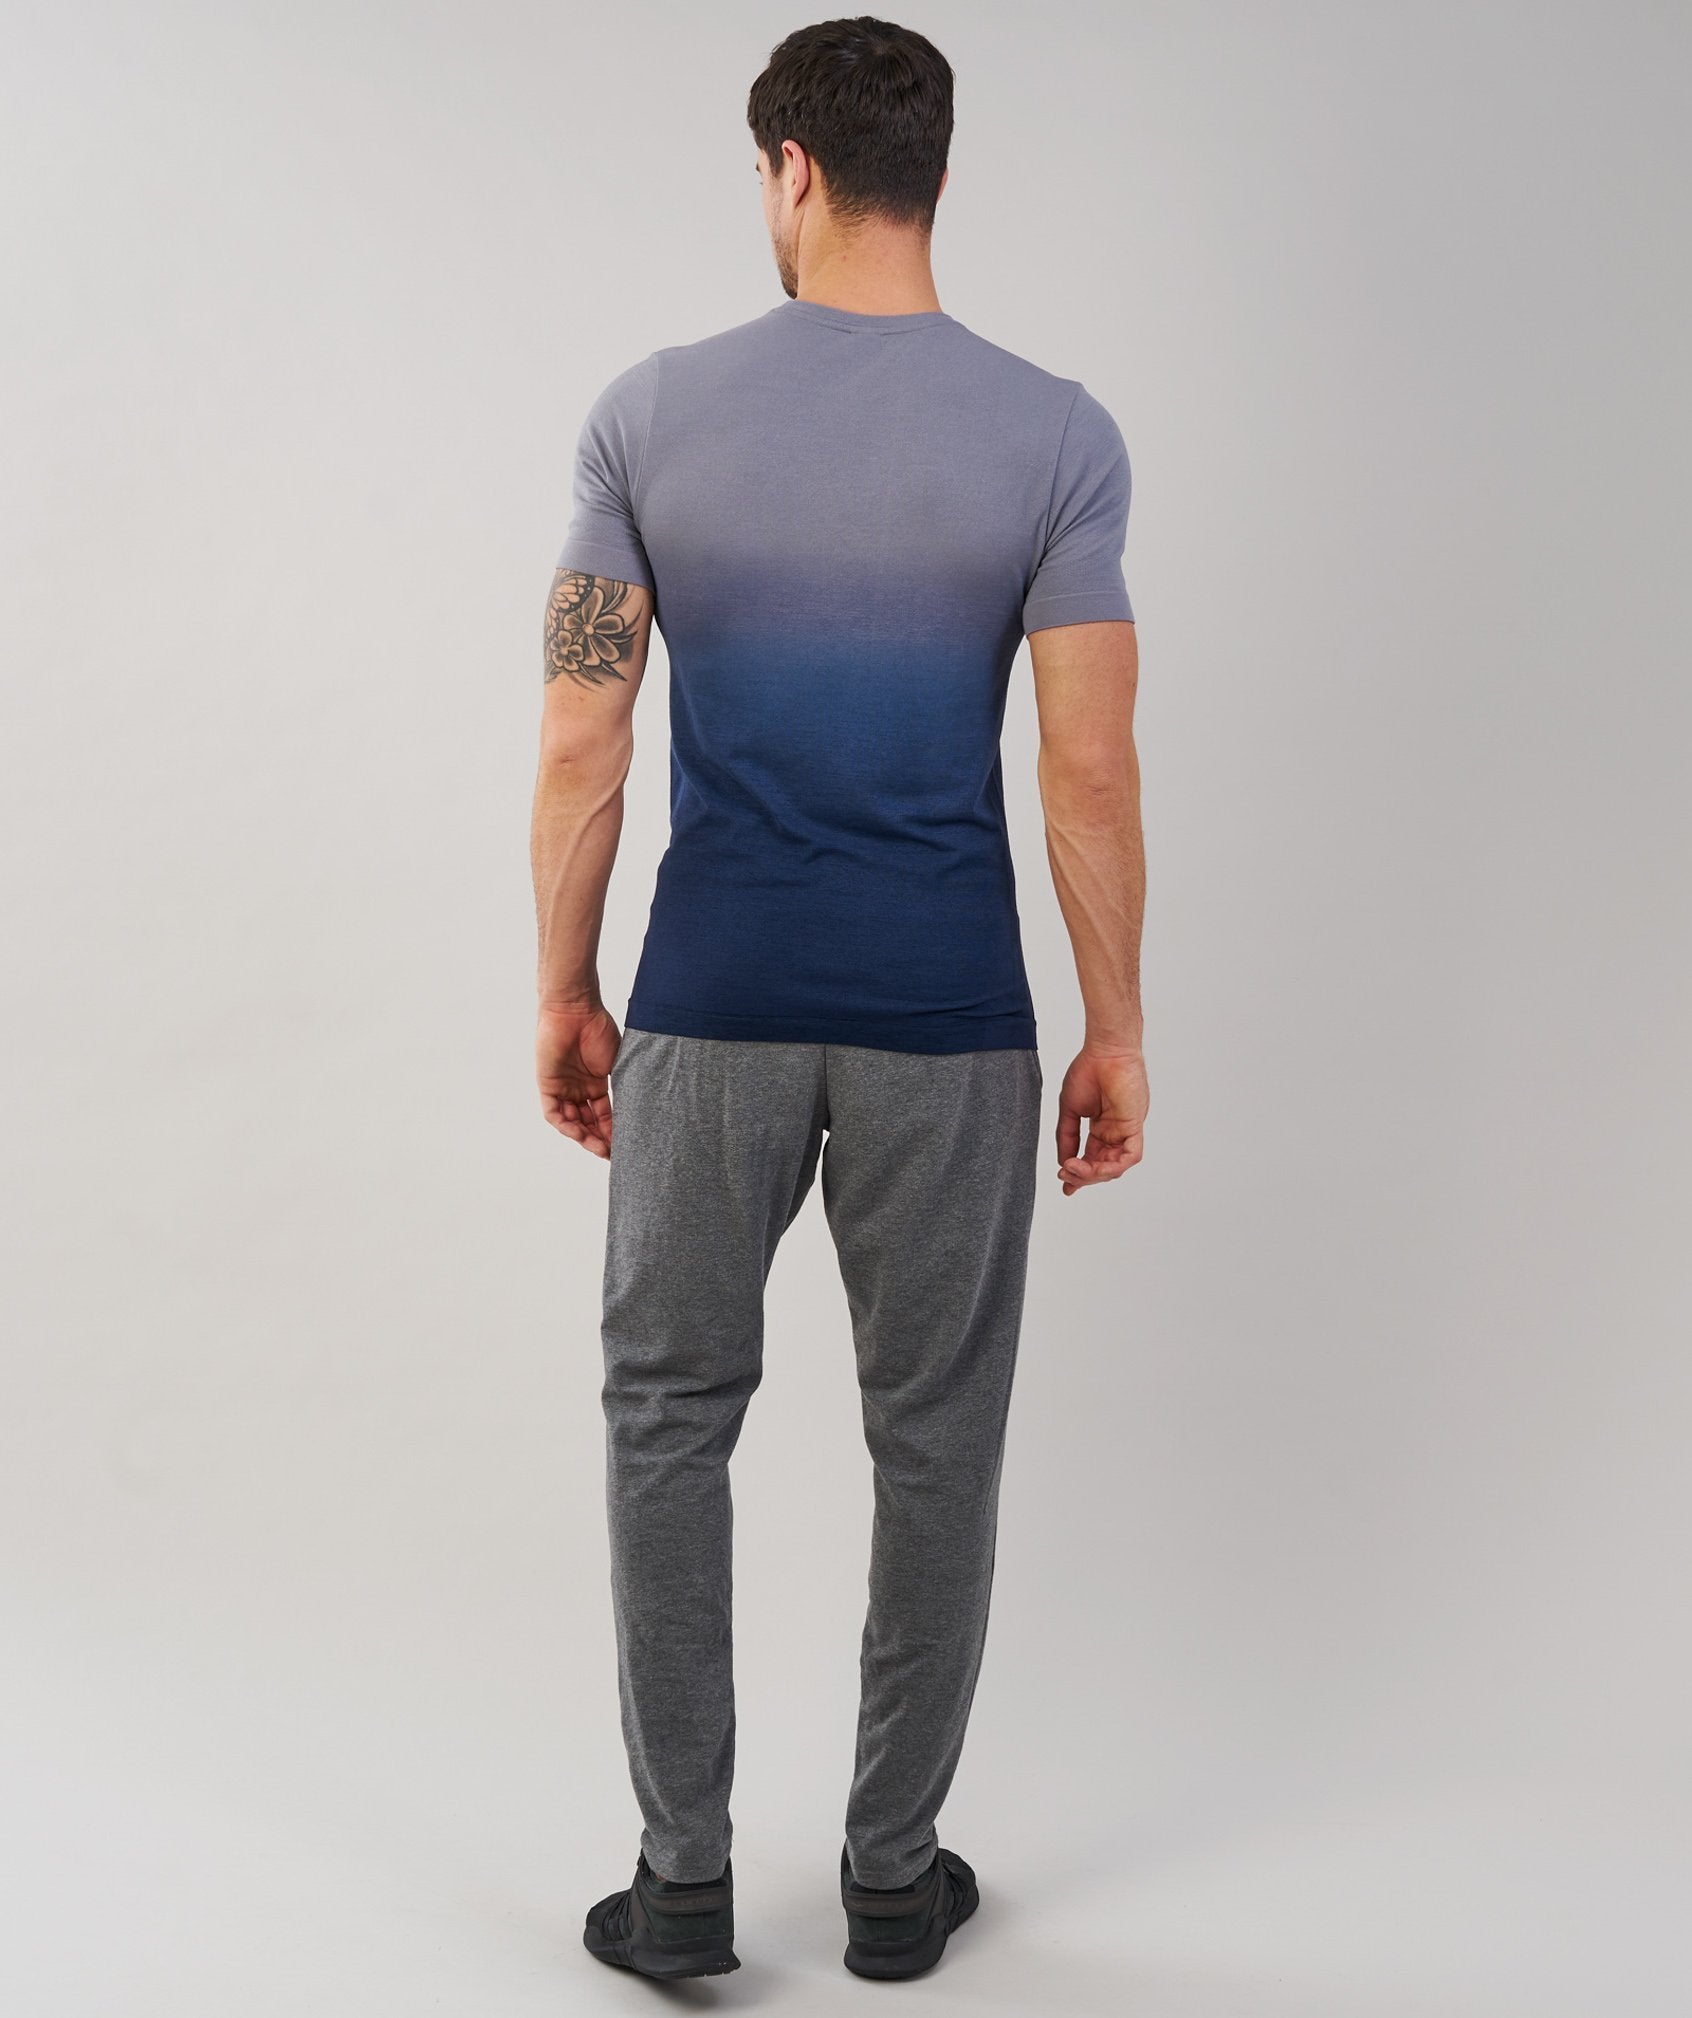 Ombre T-Shirt in Light Grey/Sapphire Blue - view 2